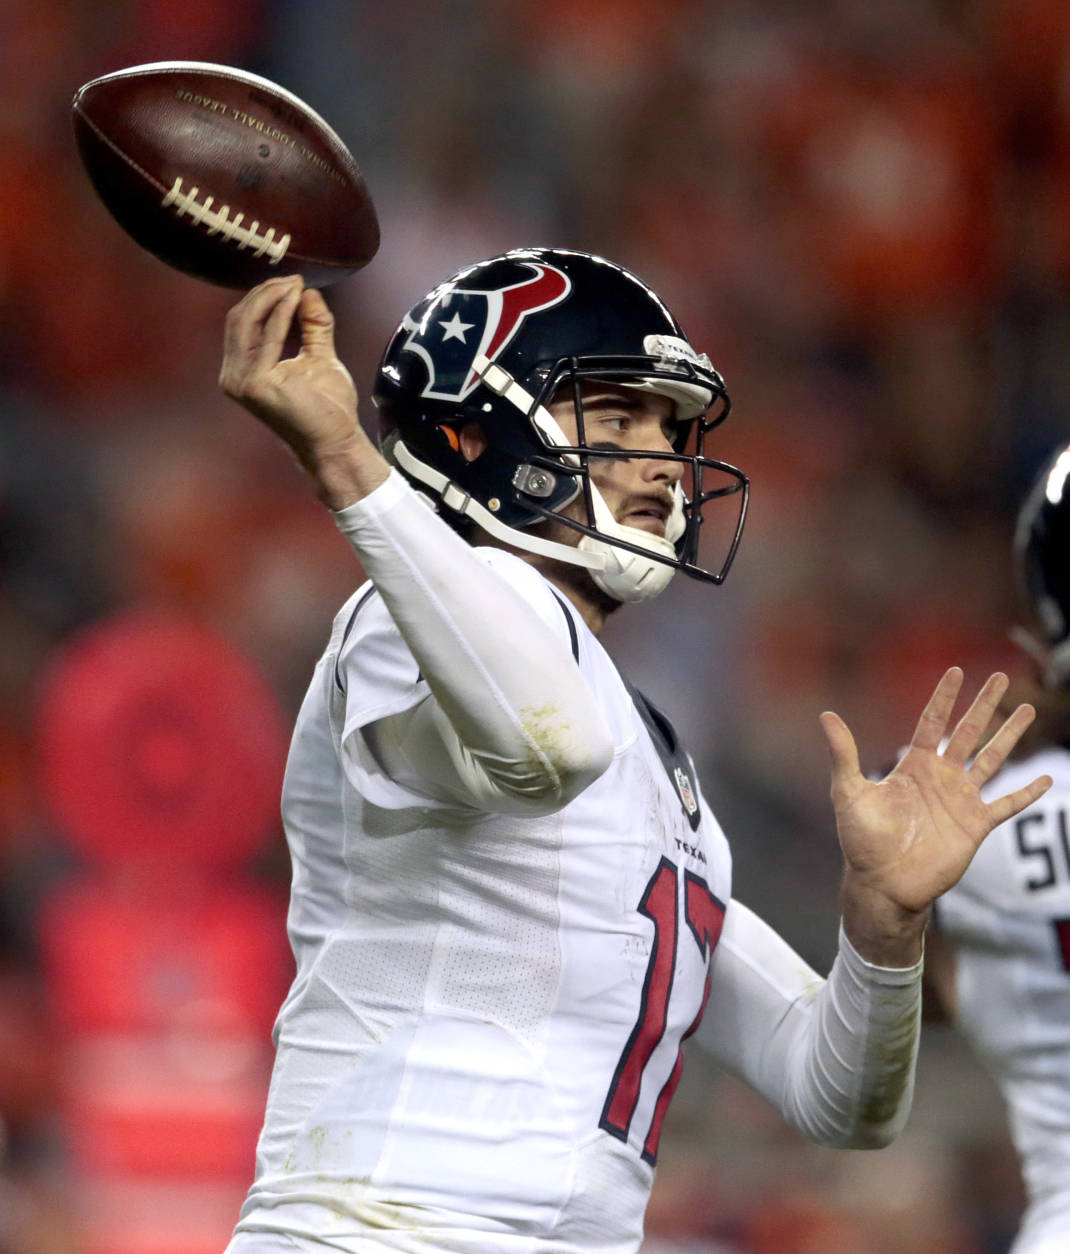 Houston Texans quarterback Brock Osweiler (17) bobbles the throw during the second half of an NFL football game against the Denver Broncos, Monday, Oct. 24, 2016, in Denver. (AP Photo/Joe Mahoney)